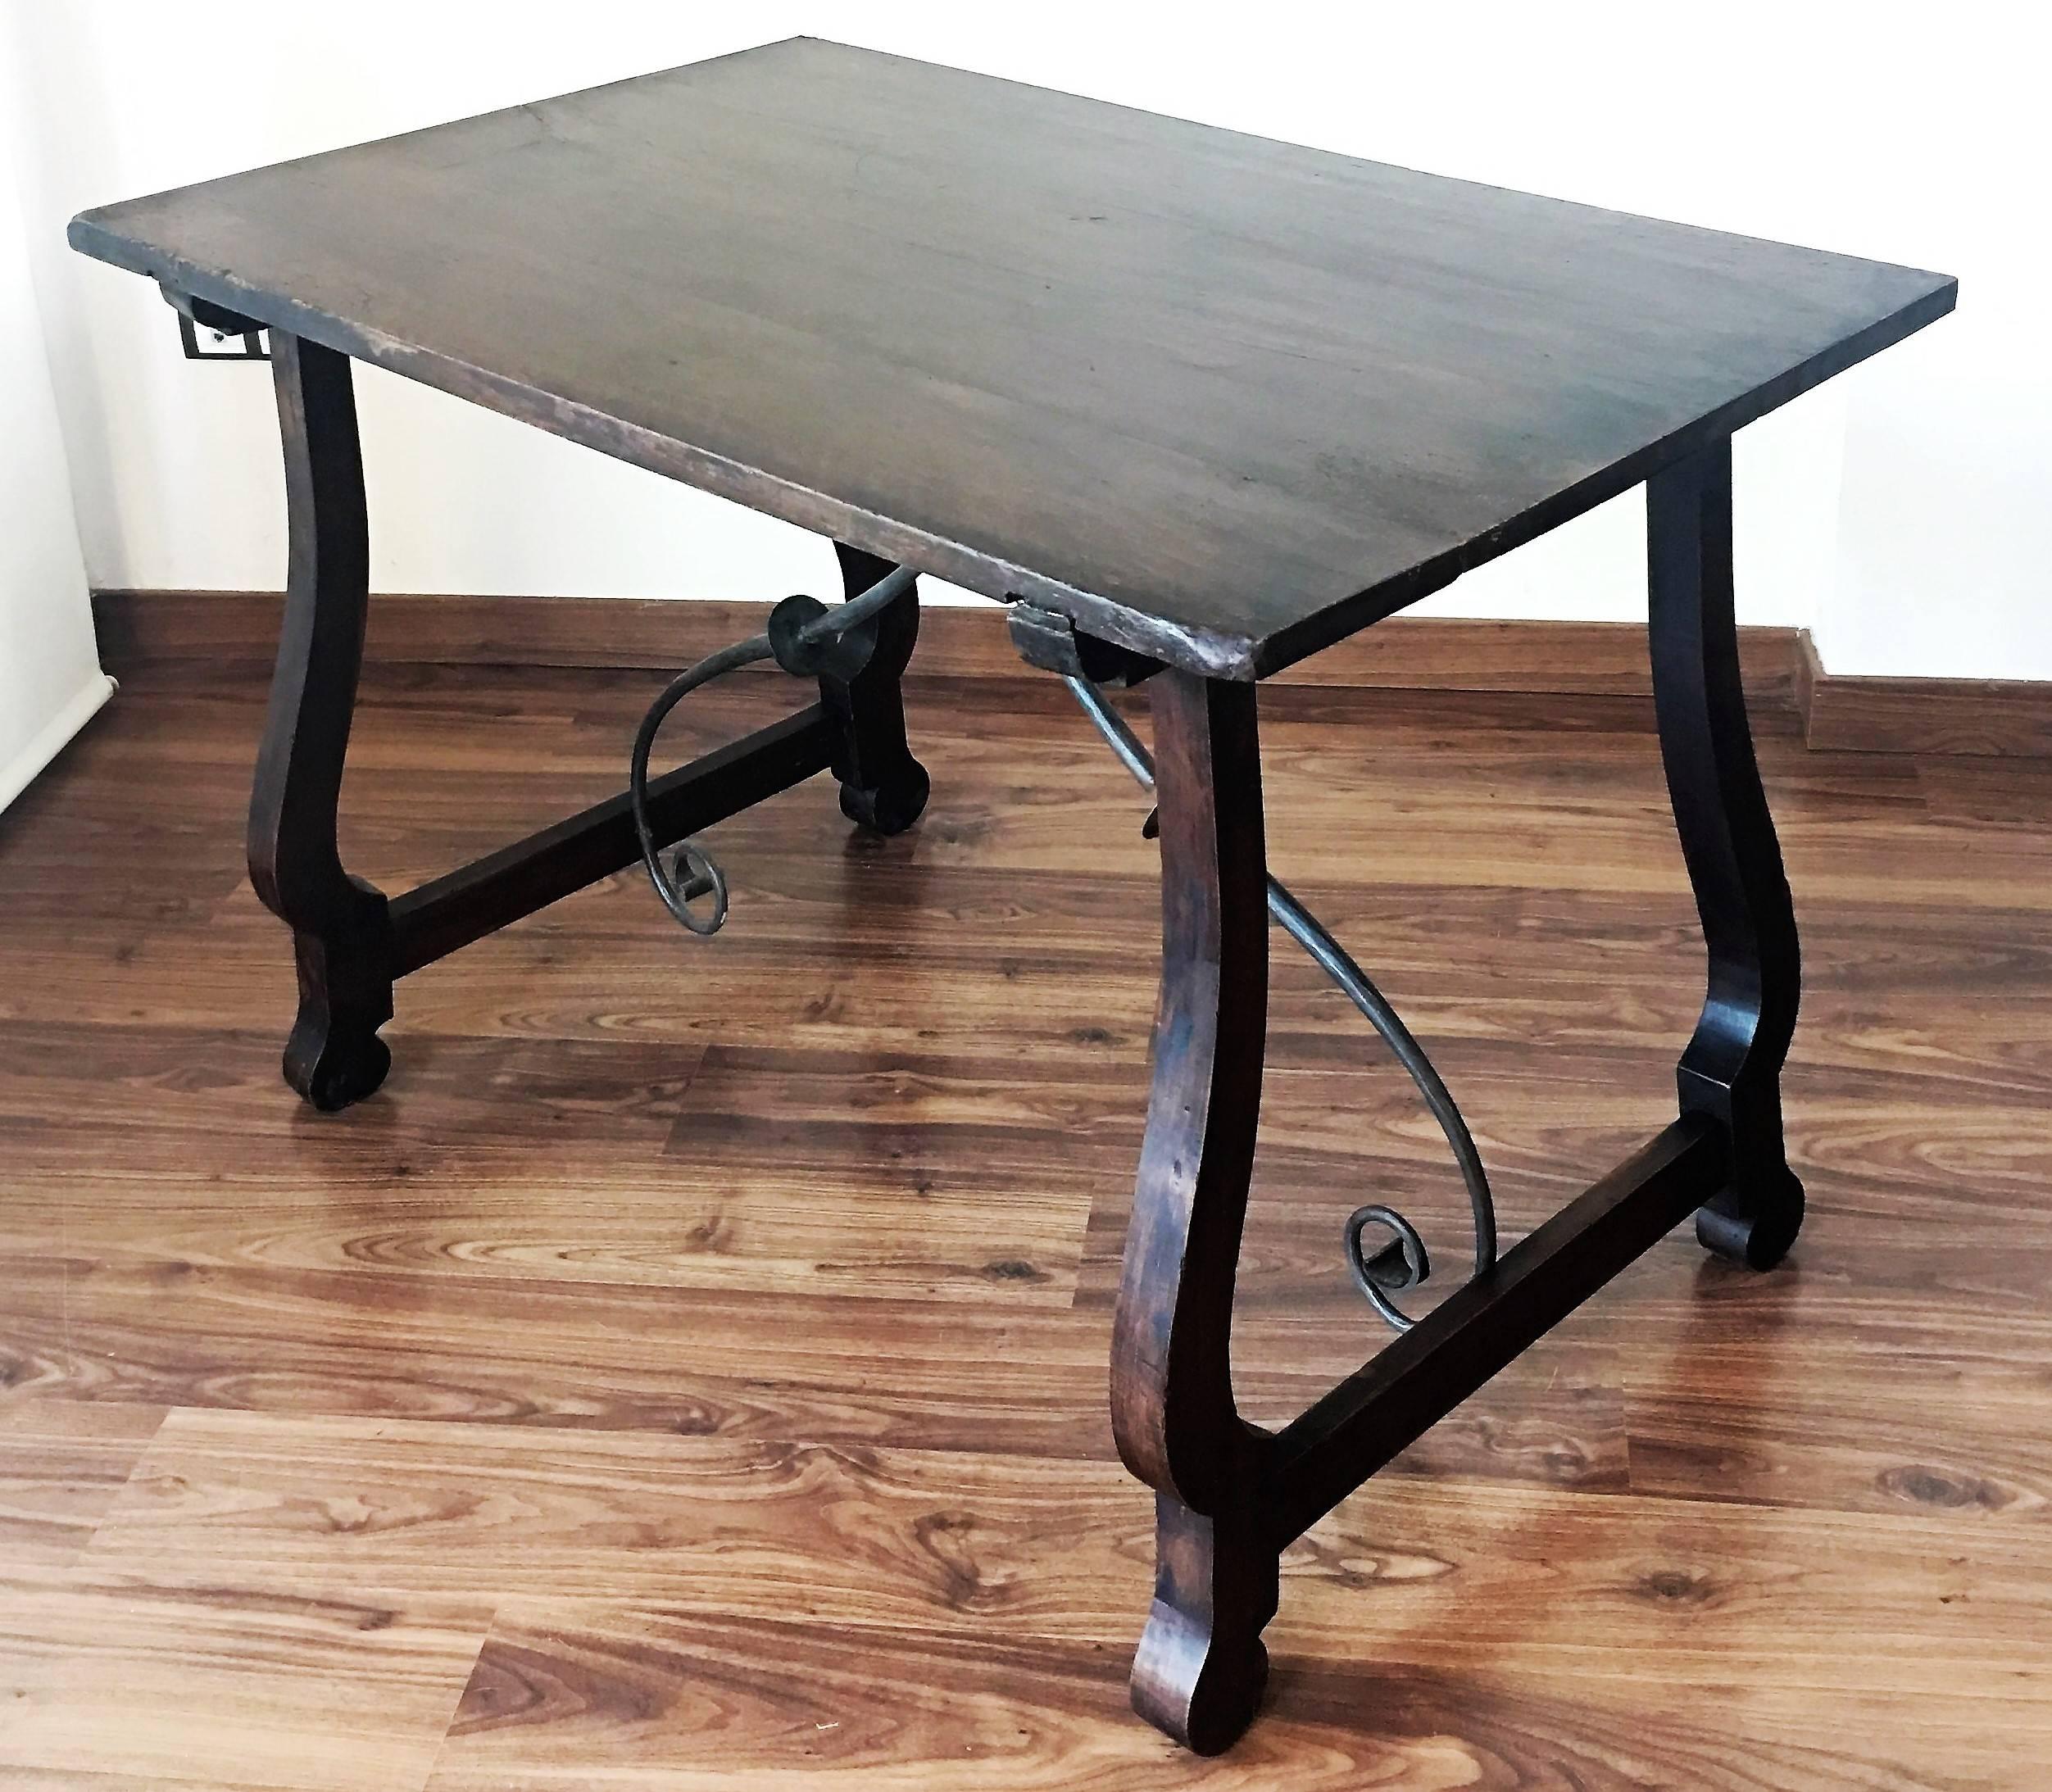 This chestnut refectory table with lyre or harp form supports and original iron stretchers. Its robust but elegant style will definitely stand out in your home or office. 

A refectory table is a long narrow table supported by heavy legs or trestles